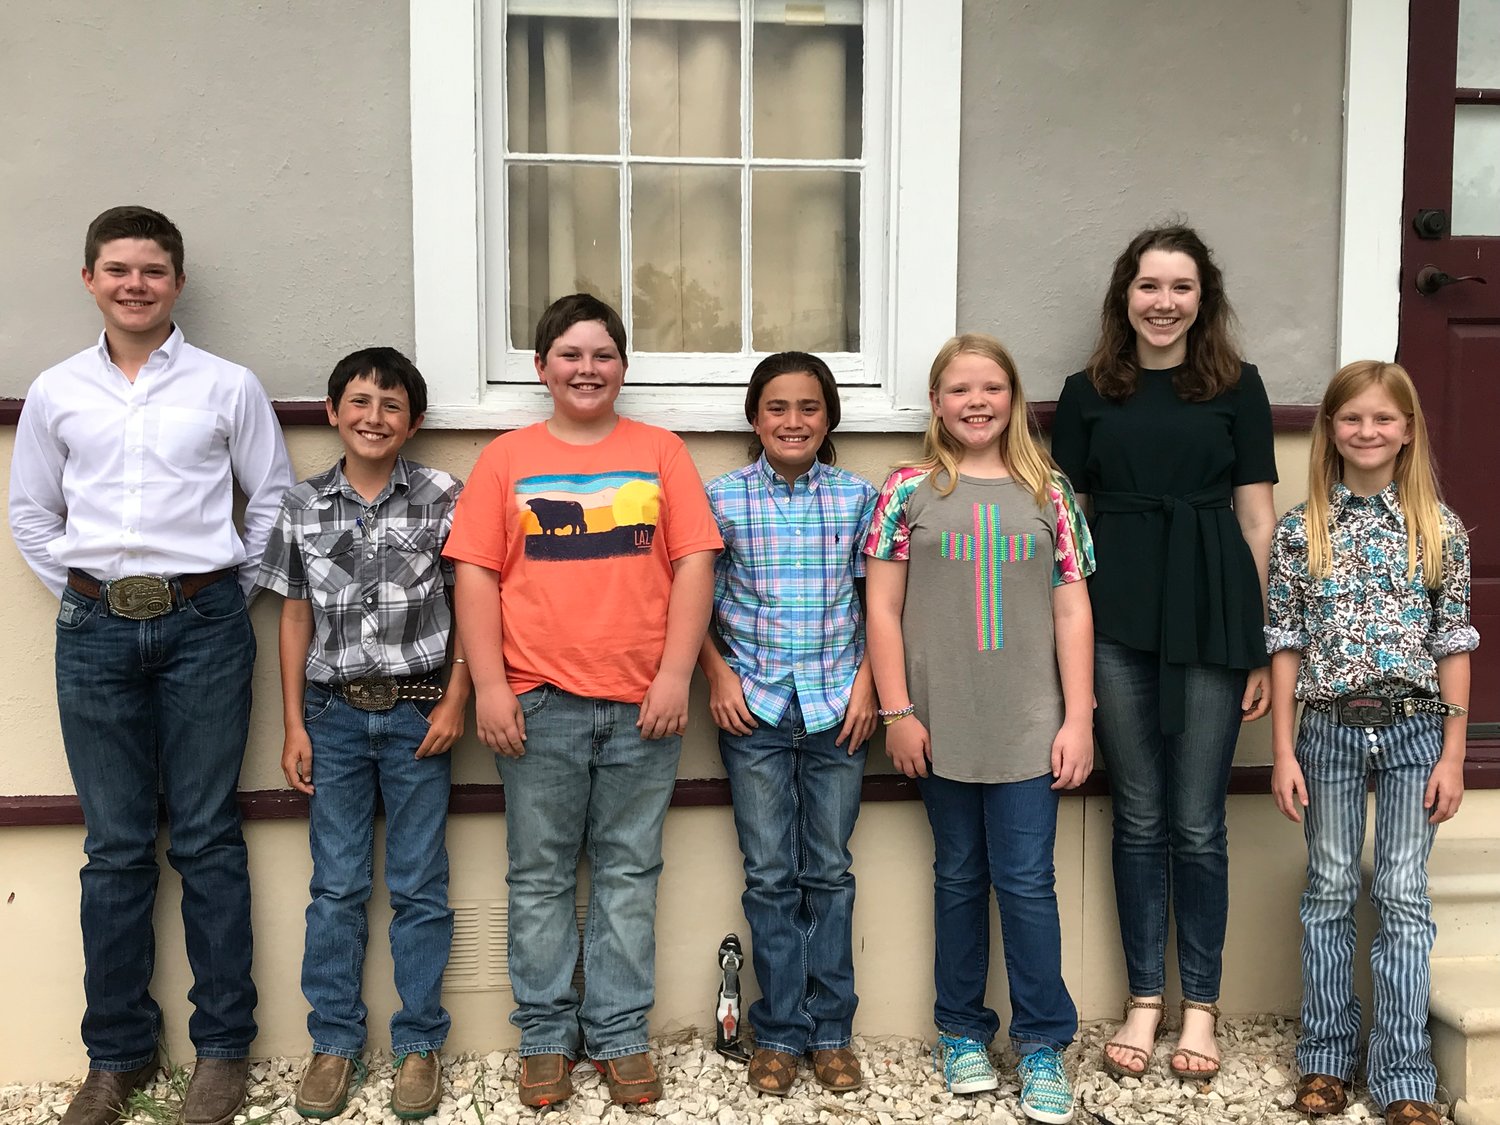 Green Clover 4-H Club officers include, from left, Augustus Sexton, Jaxon Beck, Liam Frederick, Brodi Ramos, Jamesley Hilt, Savay Sexton and Madison Hilt.